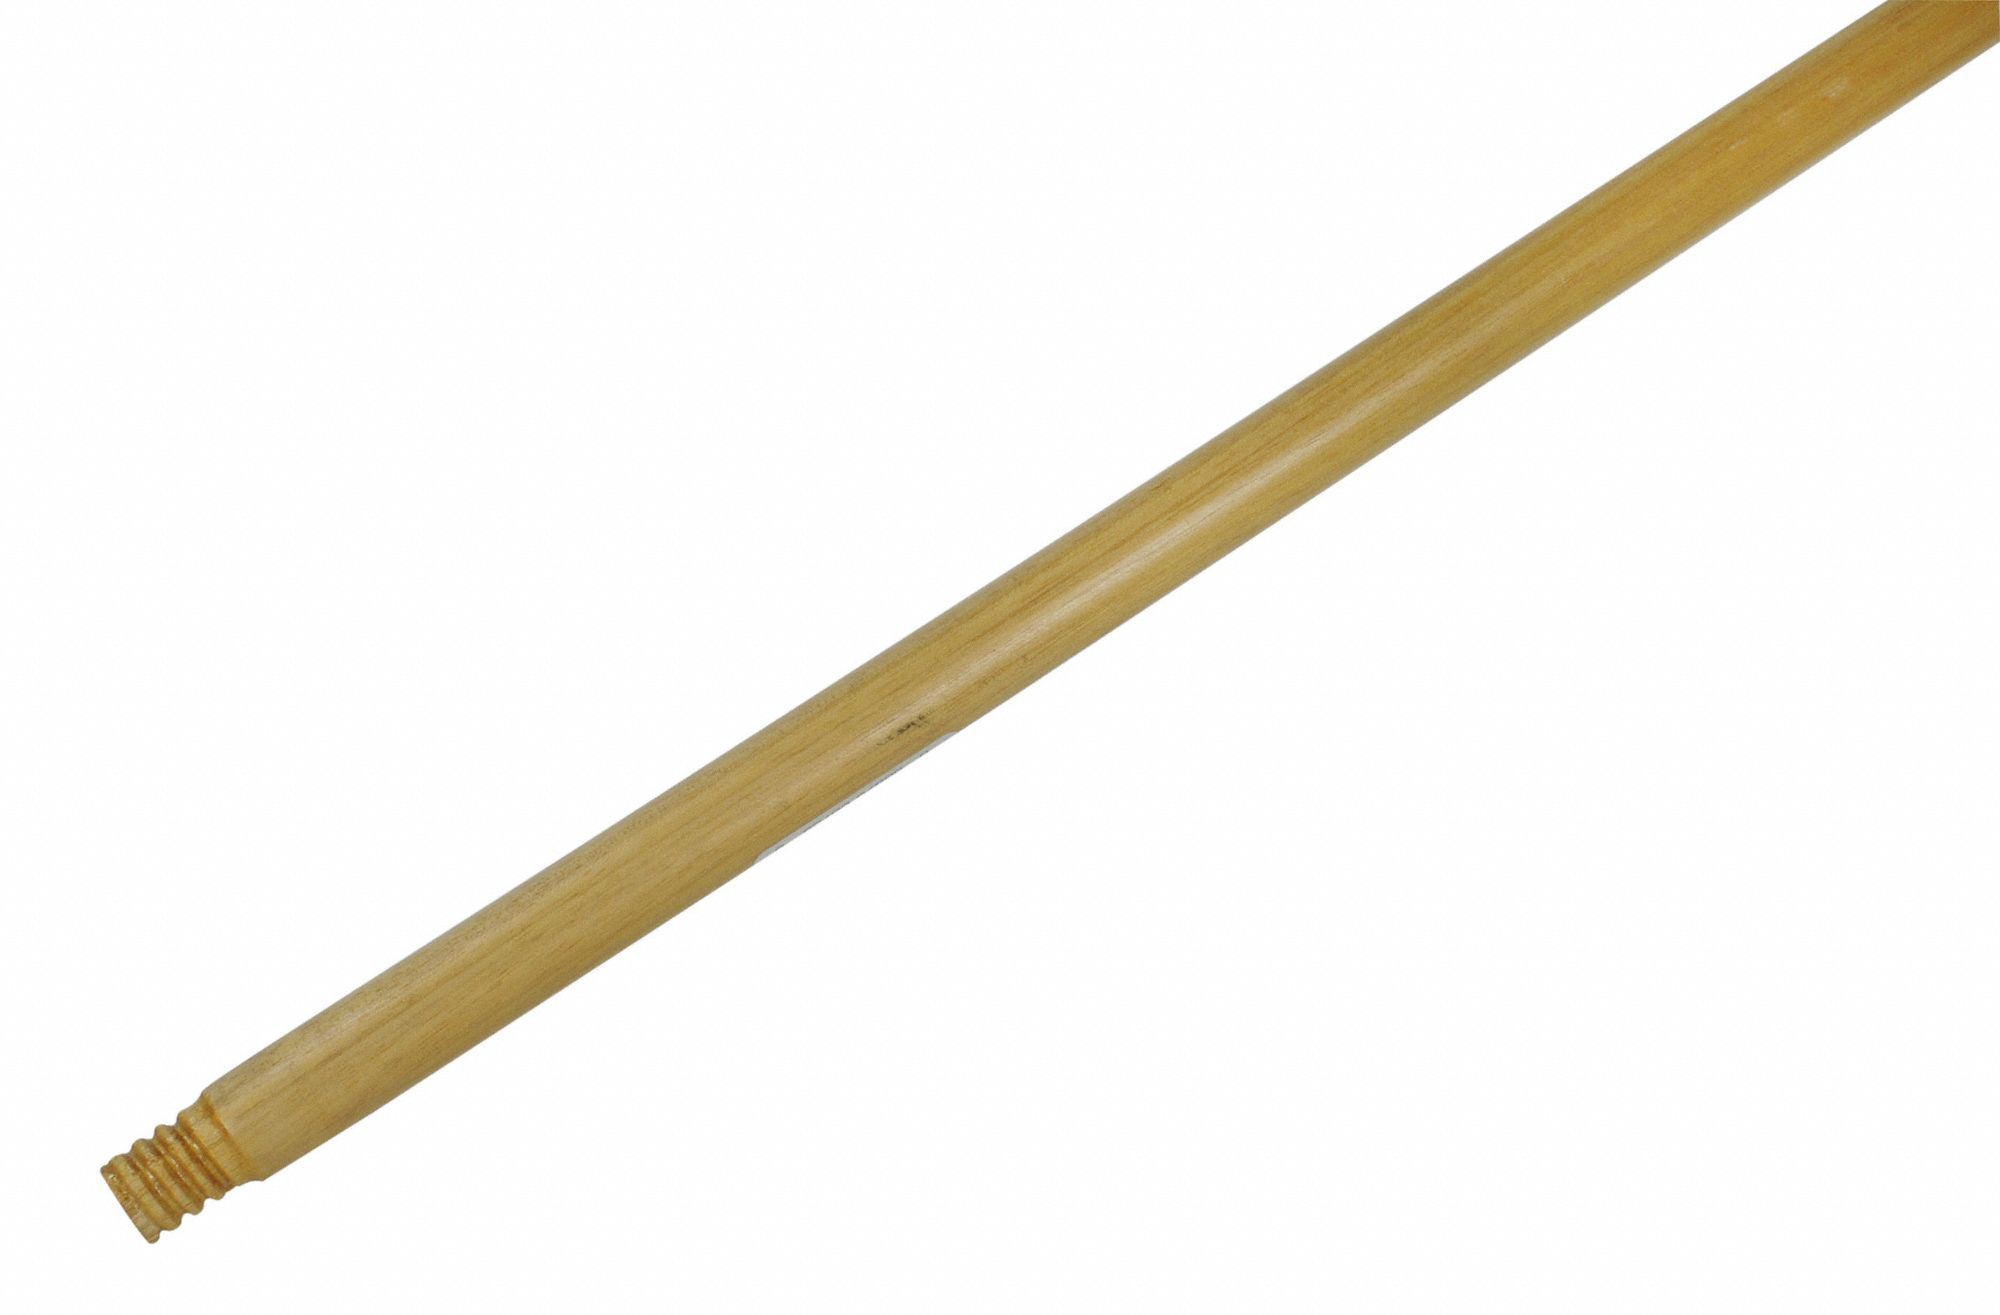 Rubbermaid Commercial Wood Threaded-Tip Broom/Sweep Handle 60" Natural 6361 